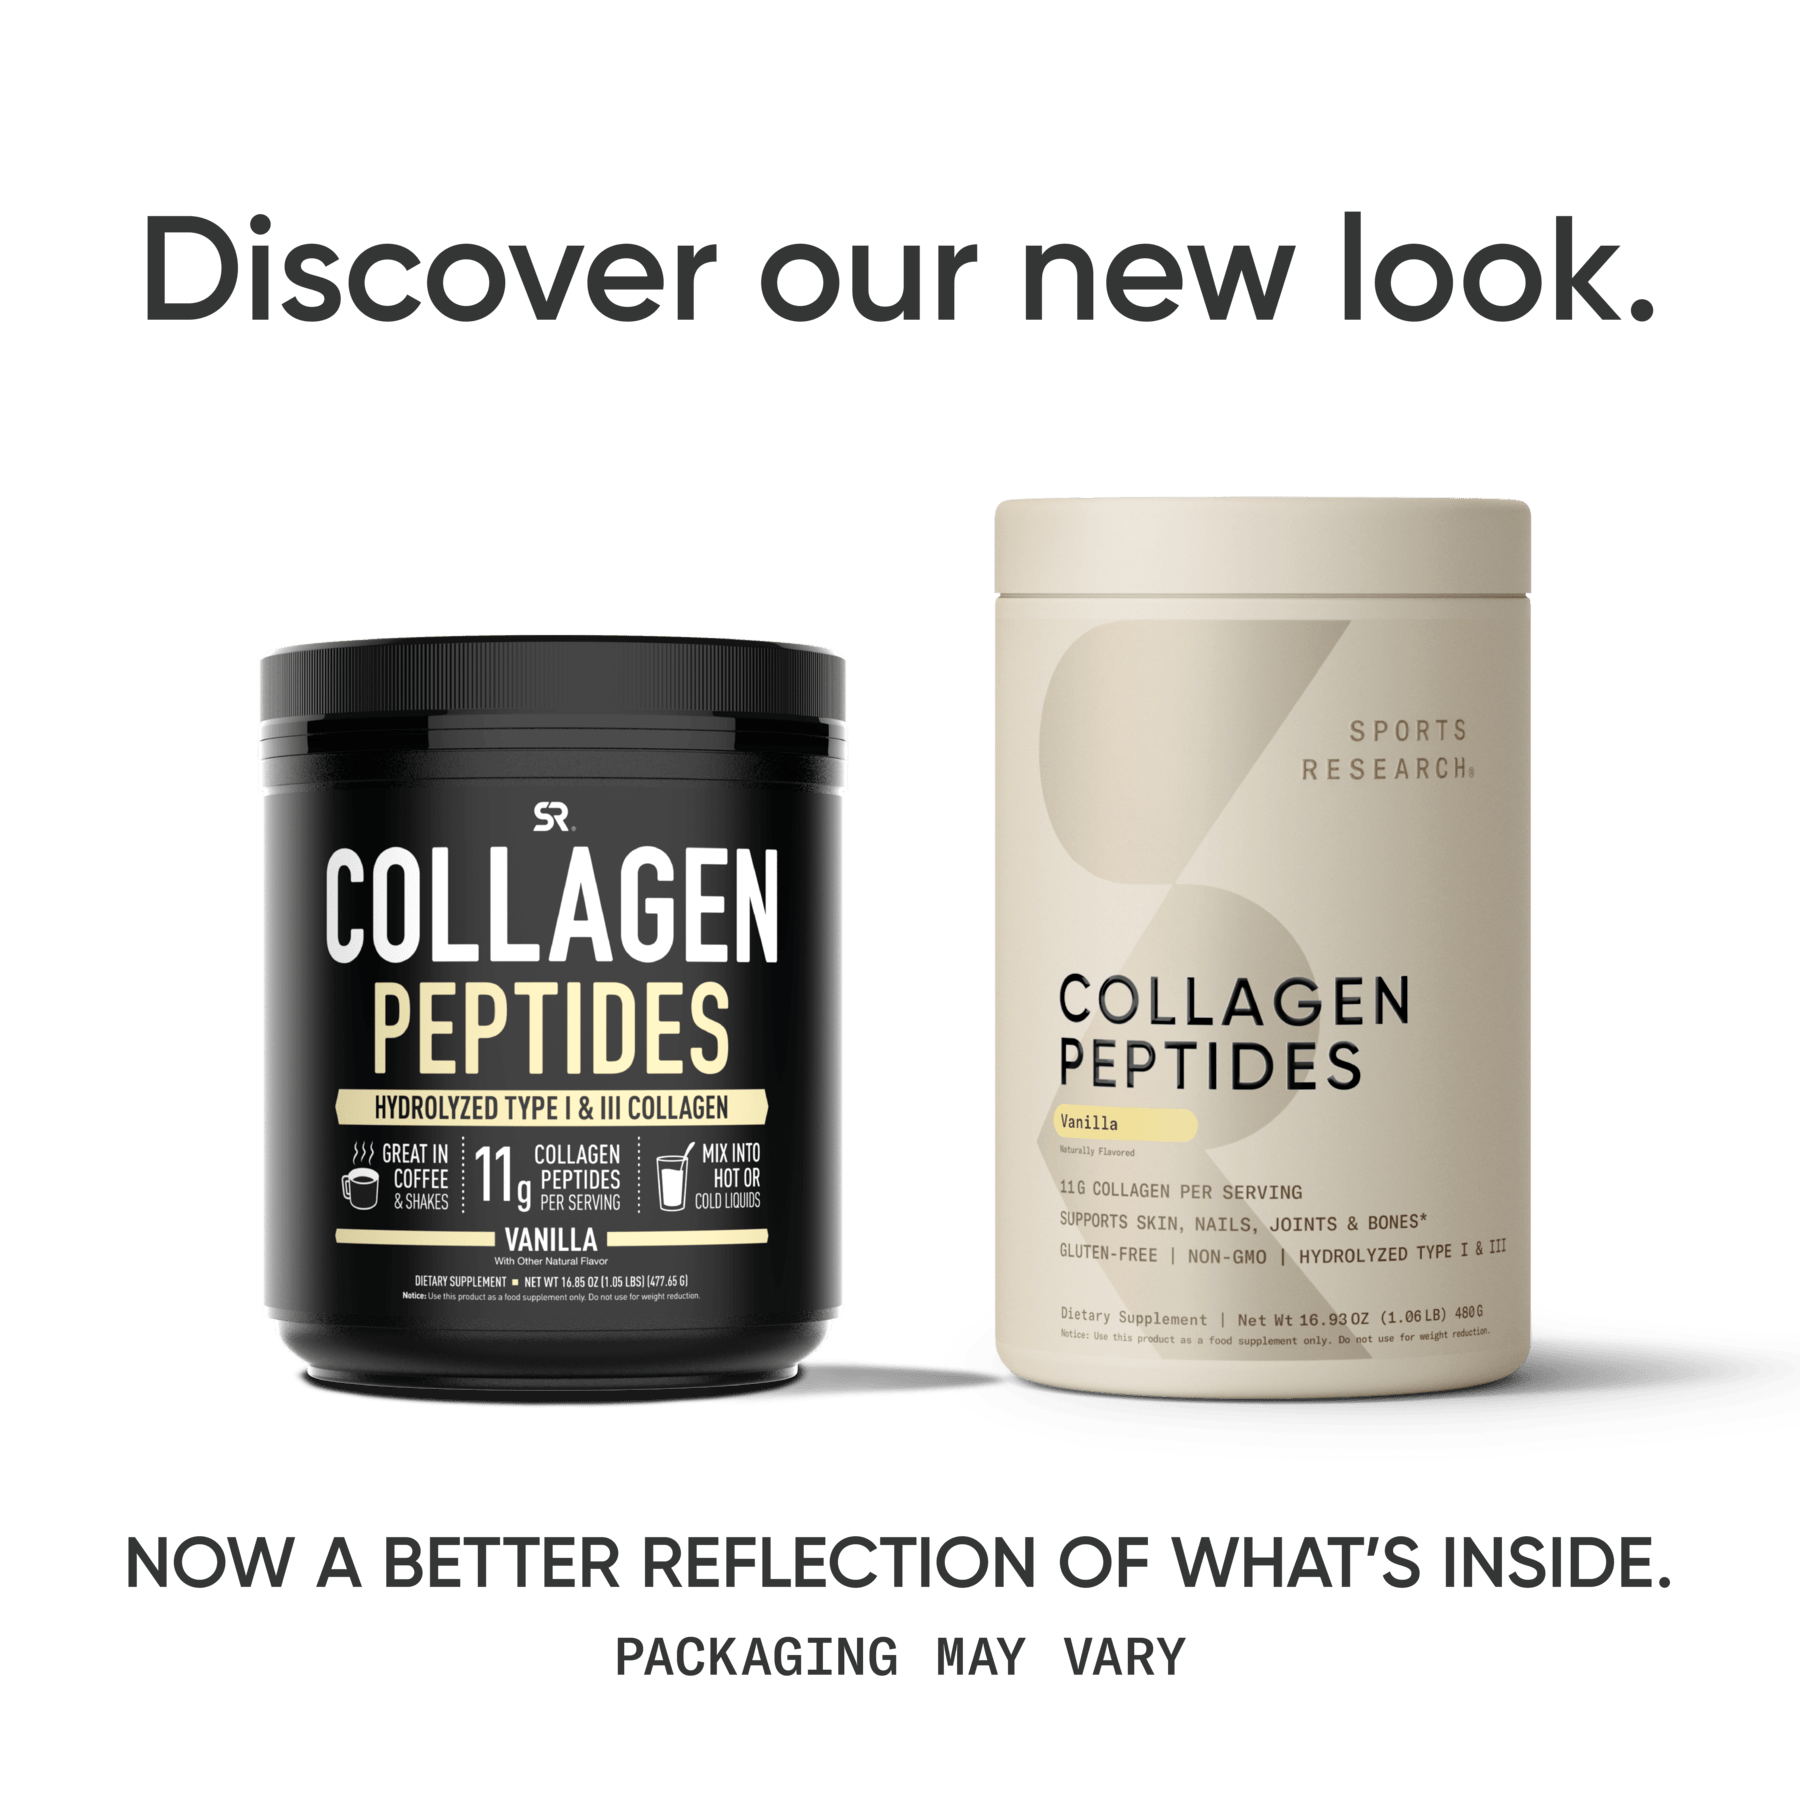 Sports Research Collagen Peptides - Flavored: now better reflection of what's inside.